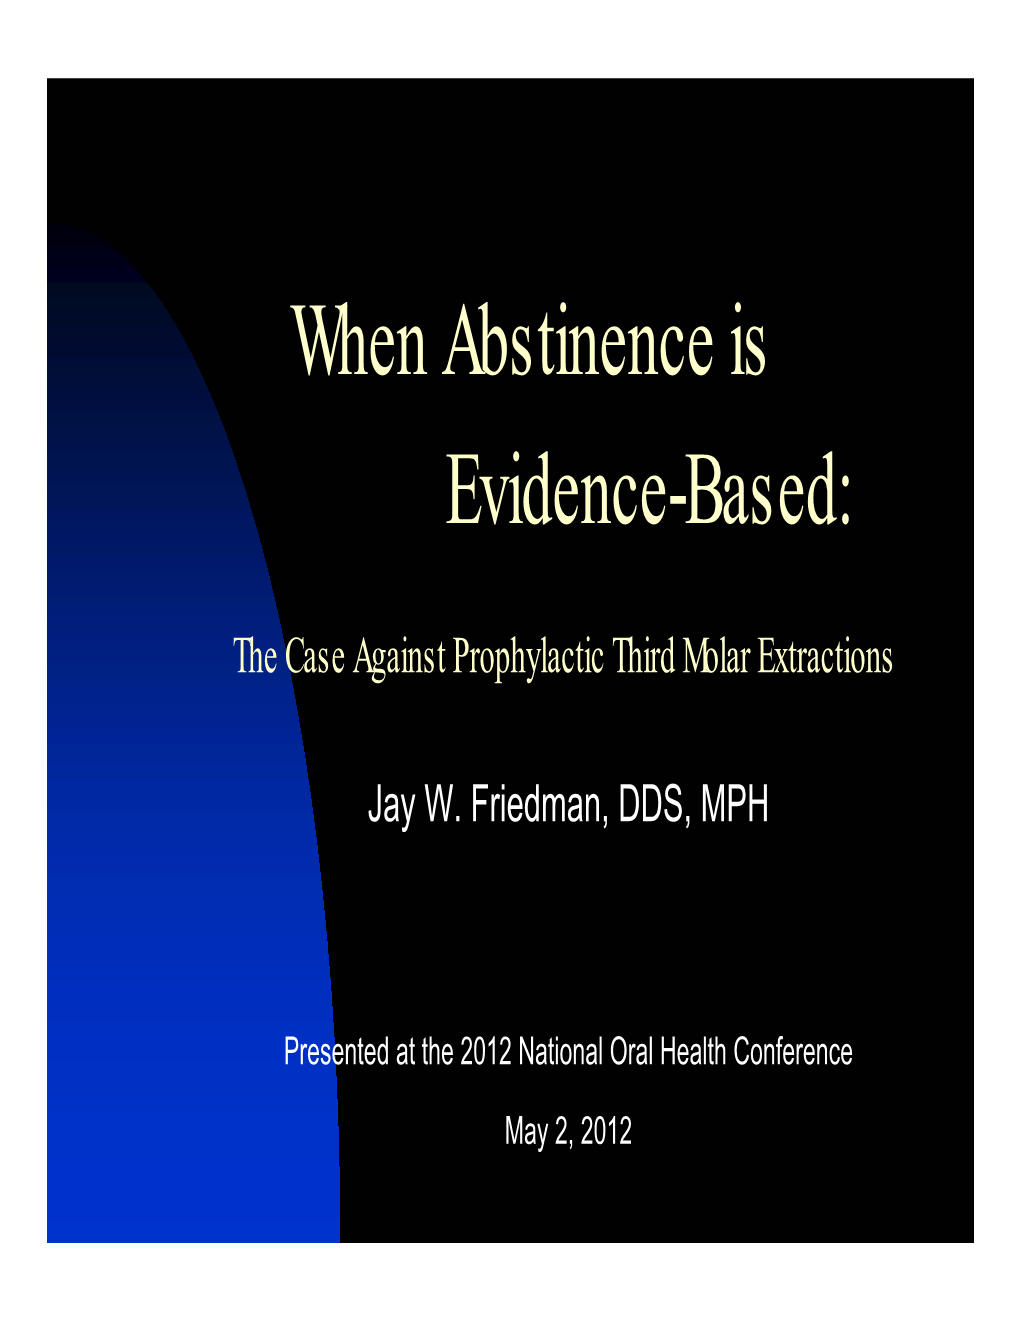 When Abstinence Is Evidence-Based